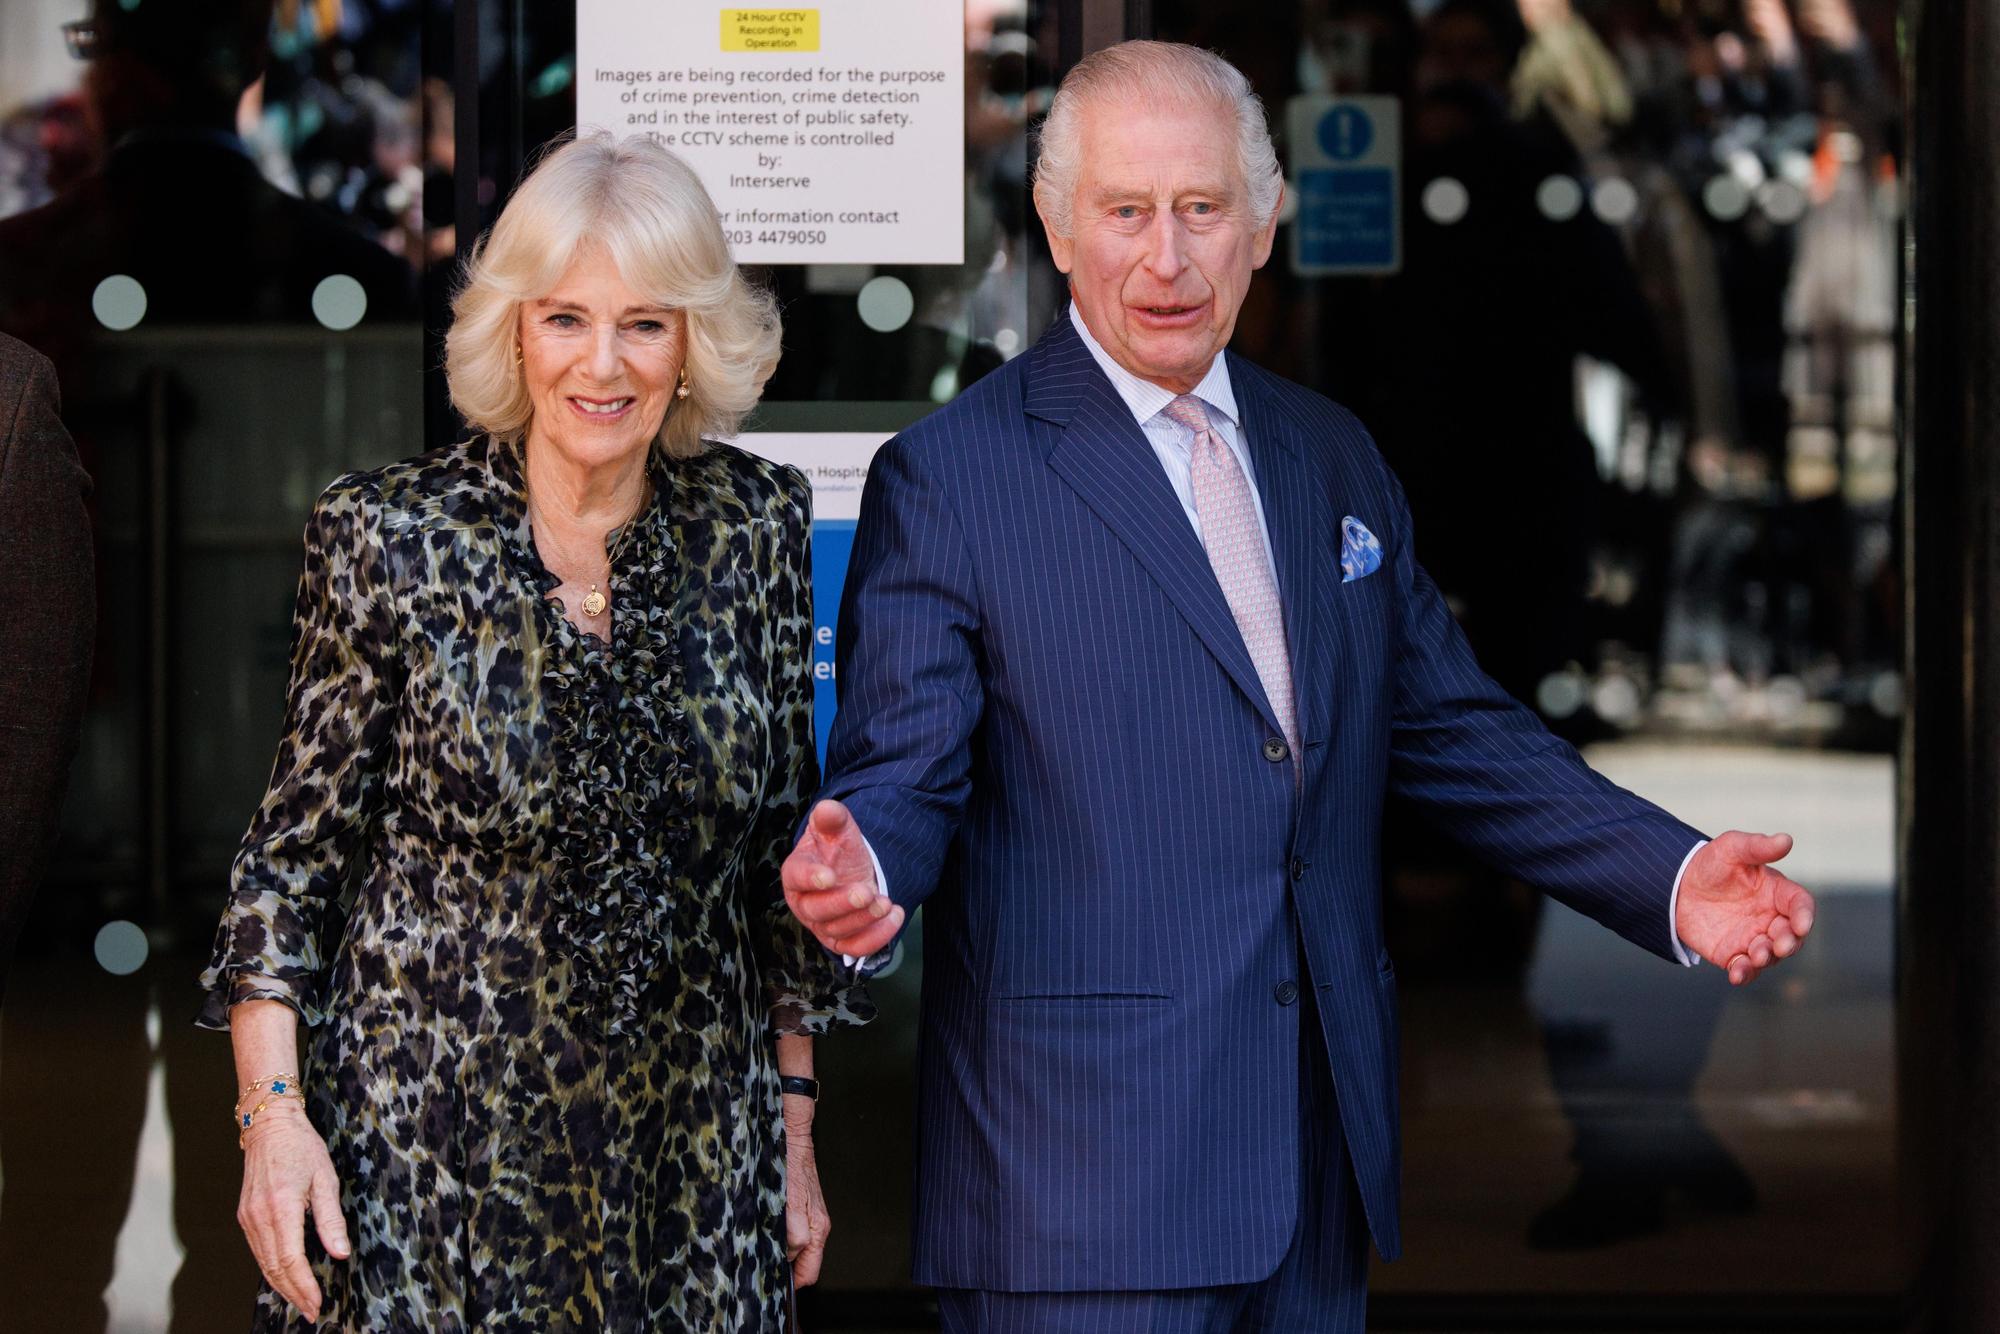 King Charles III and Queen Camilla visit Cancer Centre in London